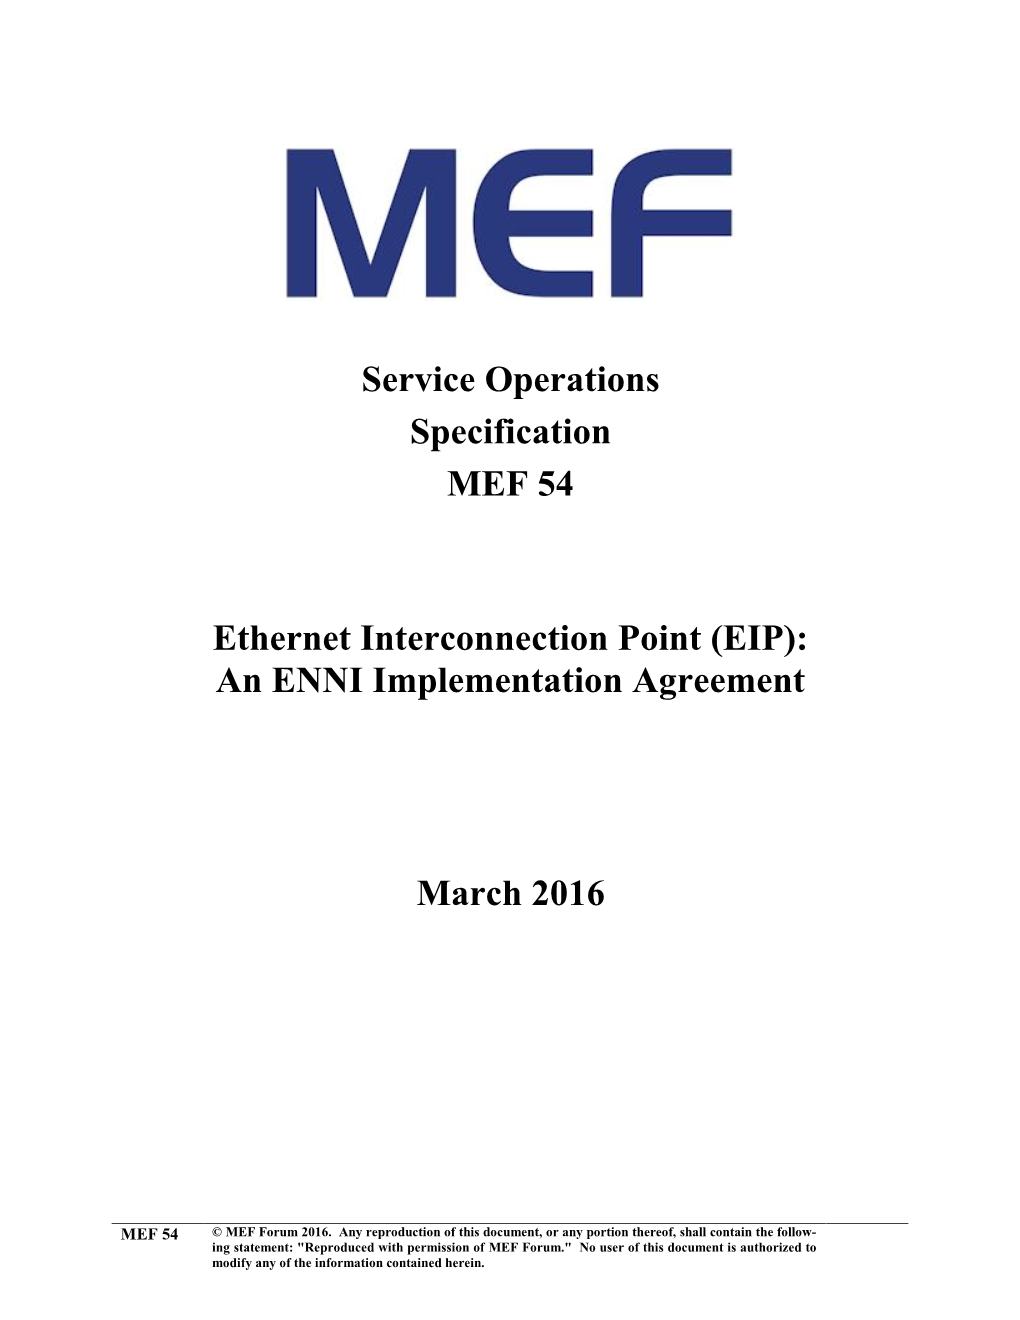 Ethernet Interconnection Point (EIP): an ENNI Implementation Agreement